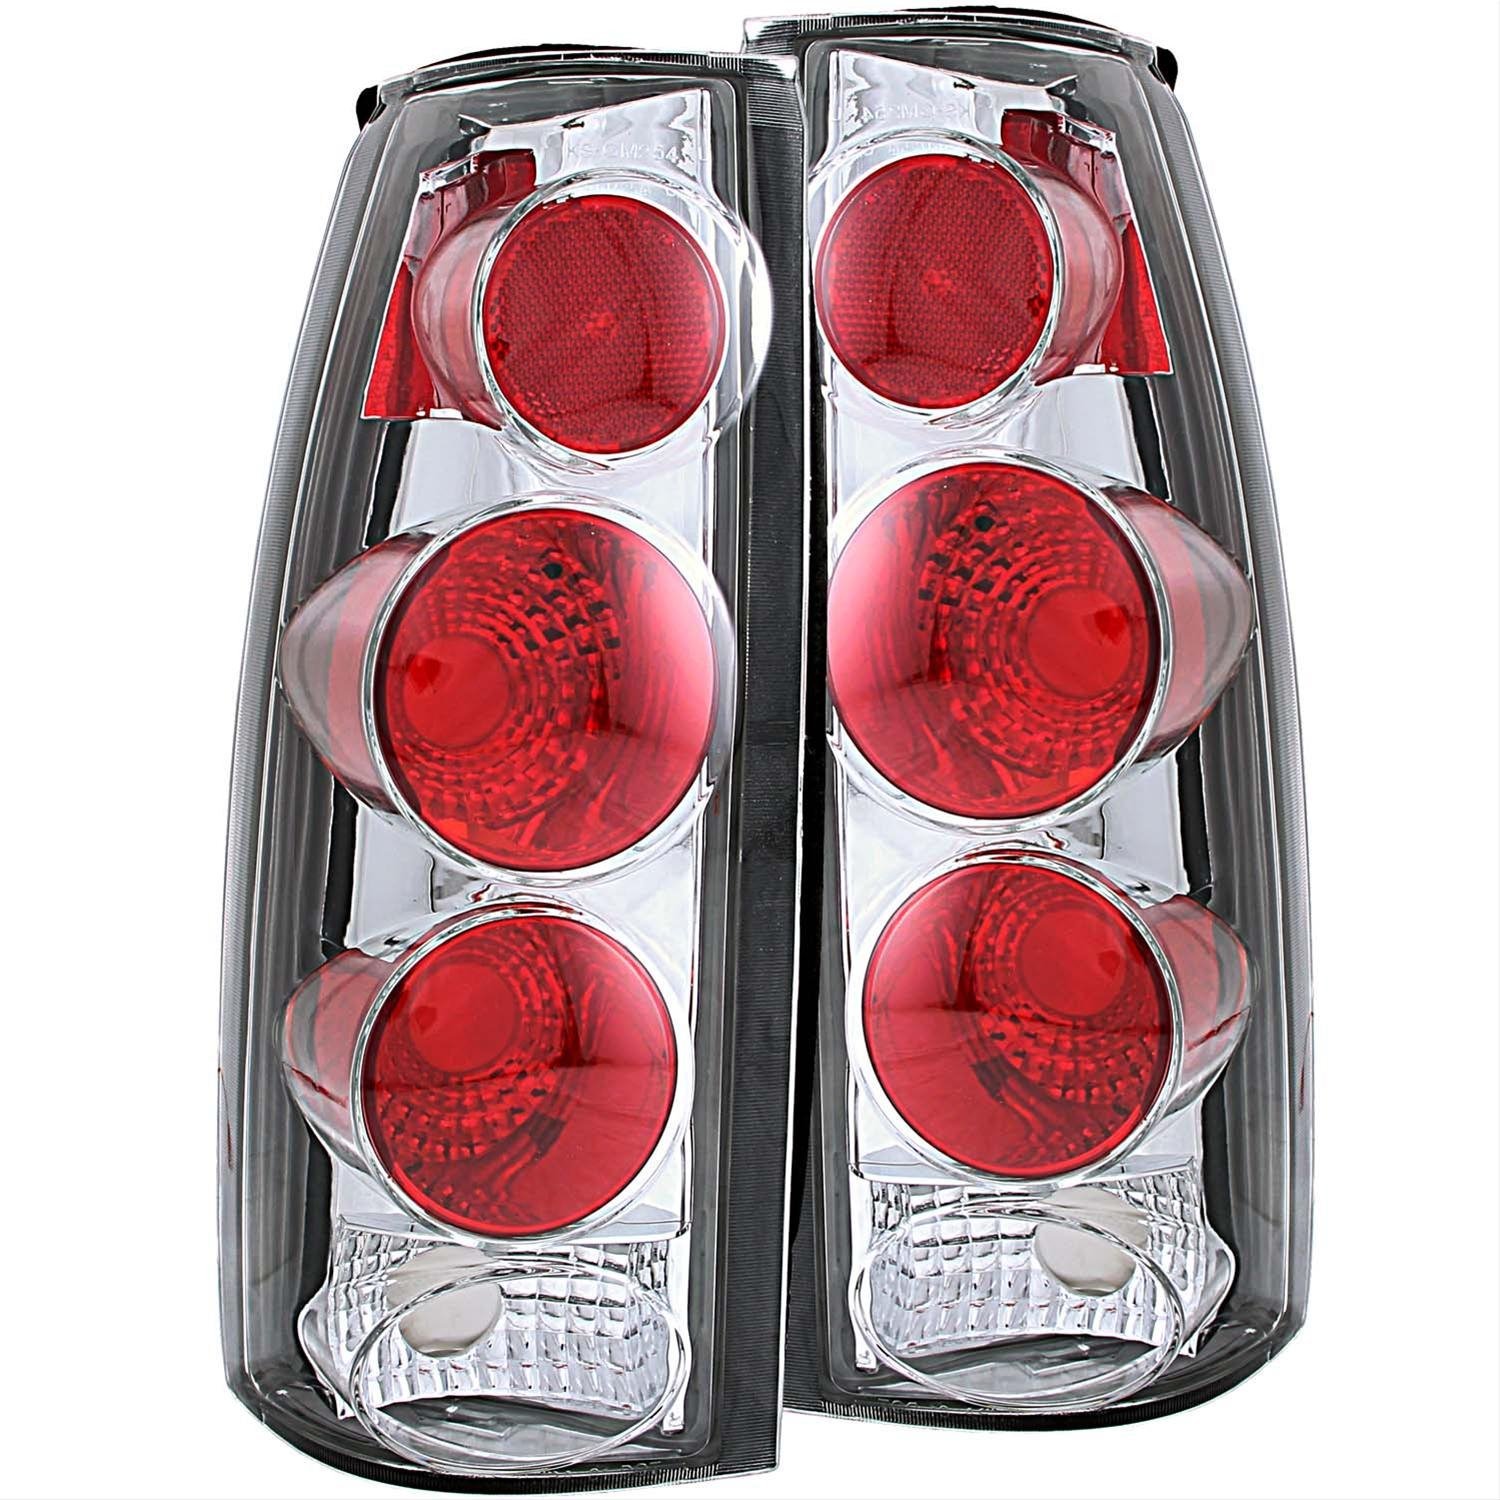 1988-1998 Chevy/GMC Full-Size Truck/SUV Taillights